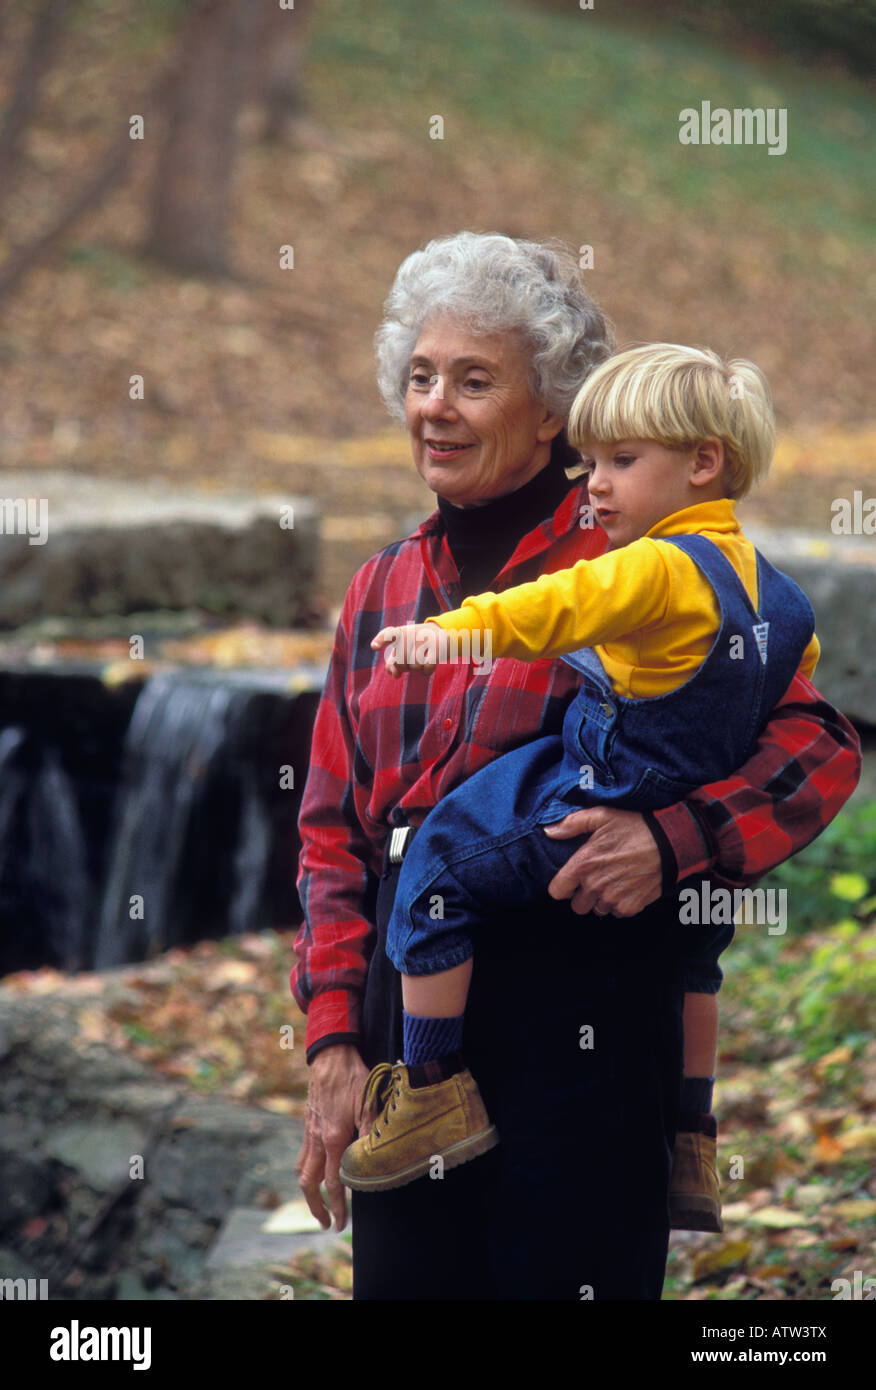 Elderly Woman Holding Her Great Grandson Outdoors in Autumn Stock Photo